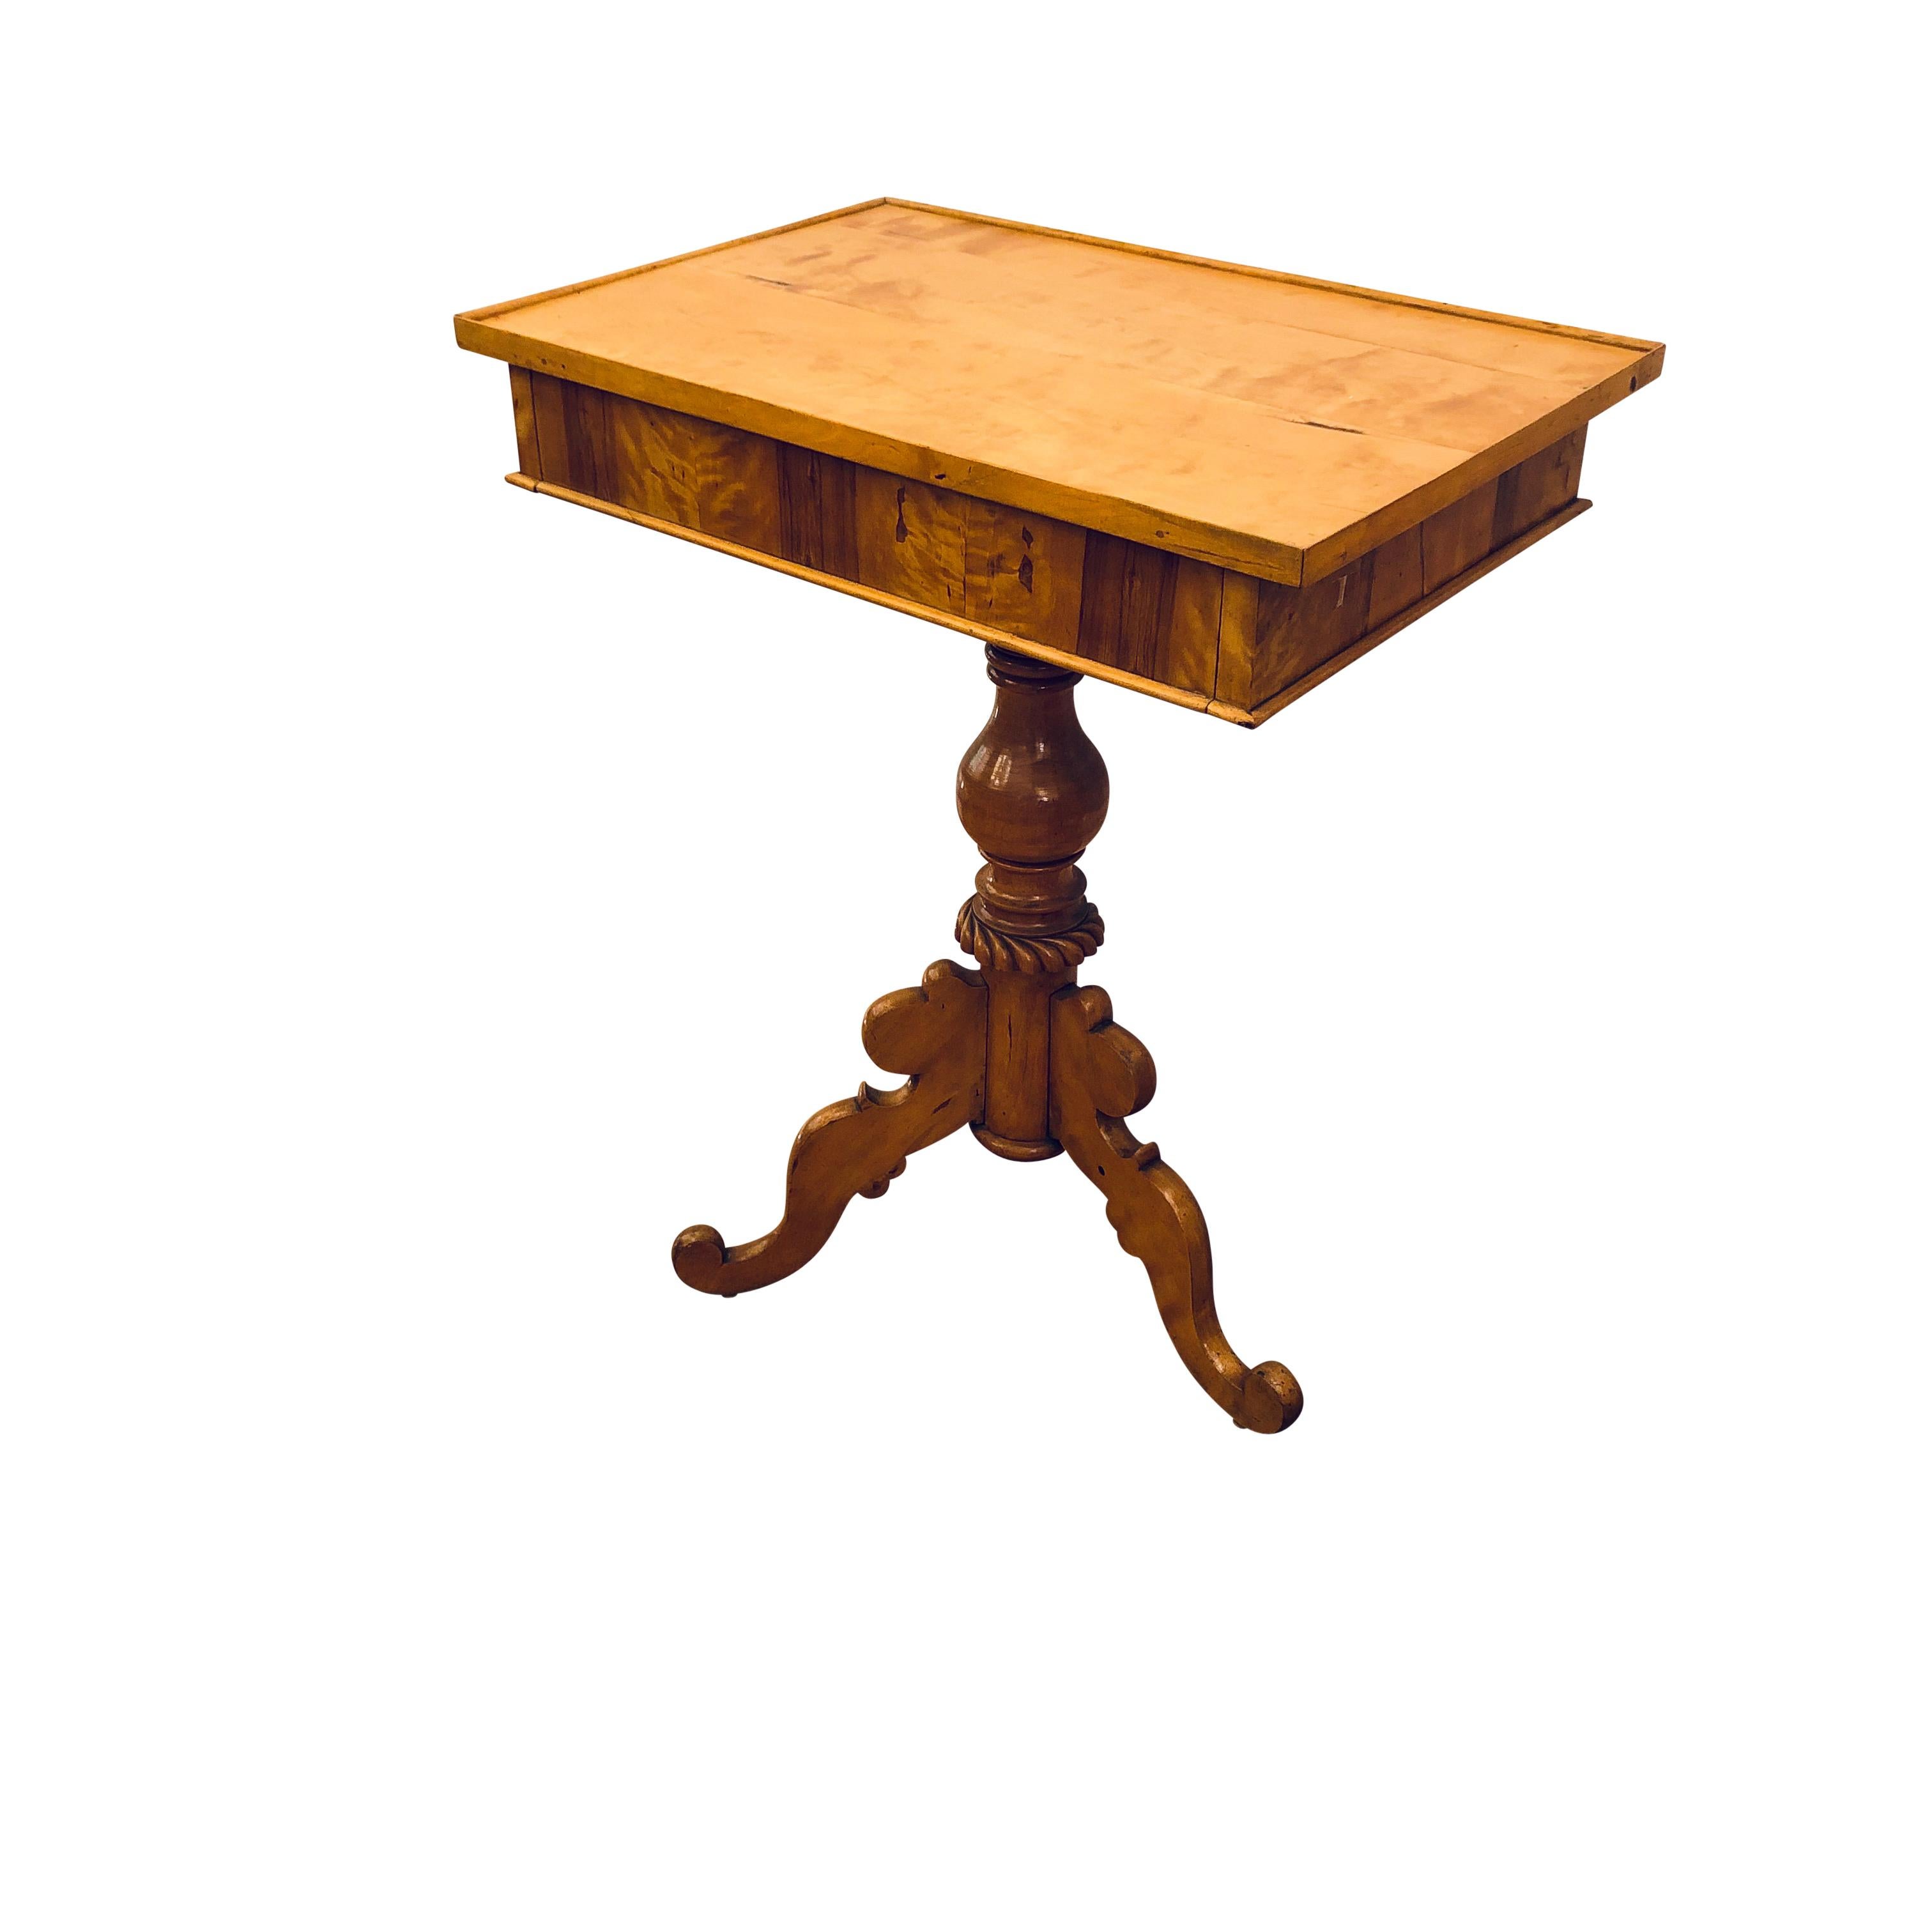 A three-legged pedestal supports is very steady and supports a generous table surface whose faces are adorned with prime bookmatched birch veneers.
  